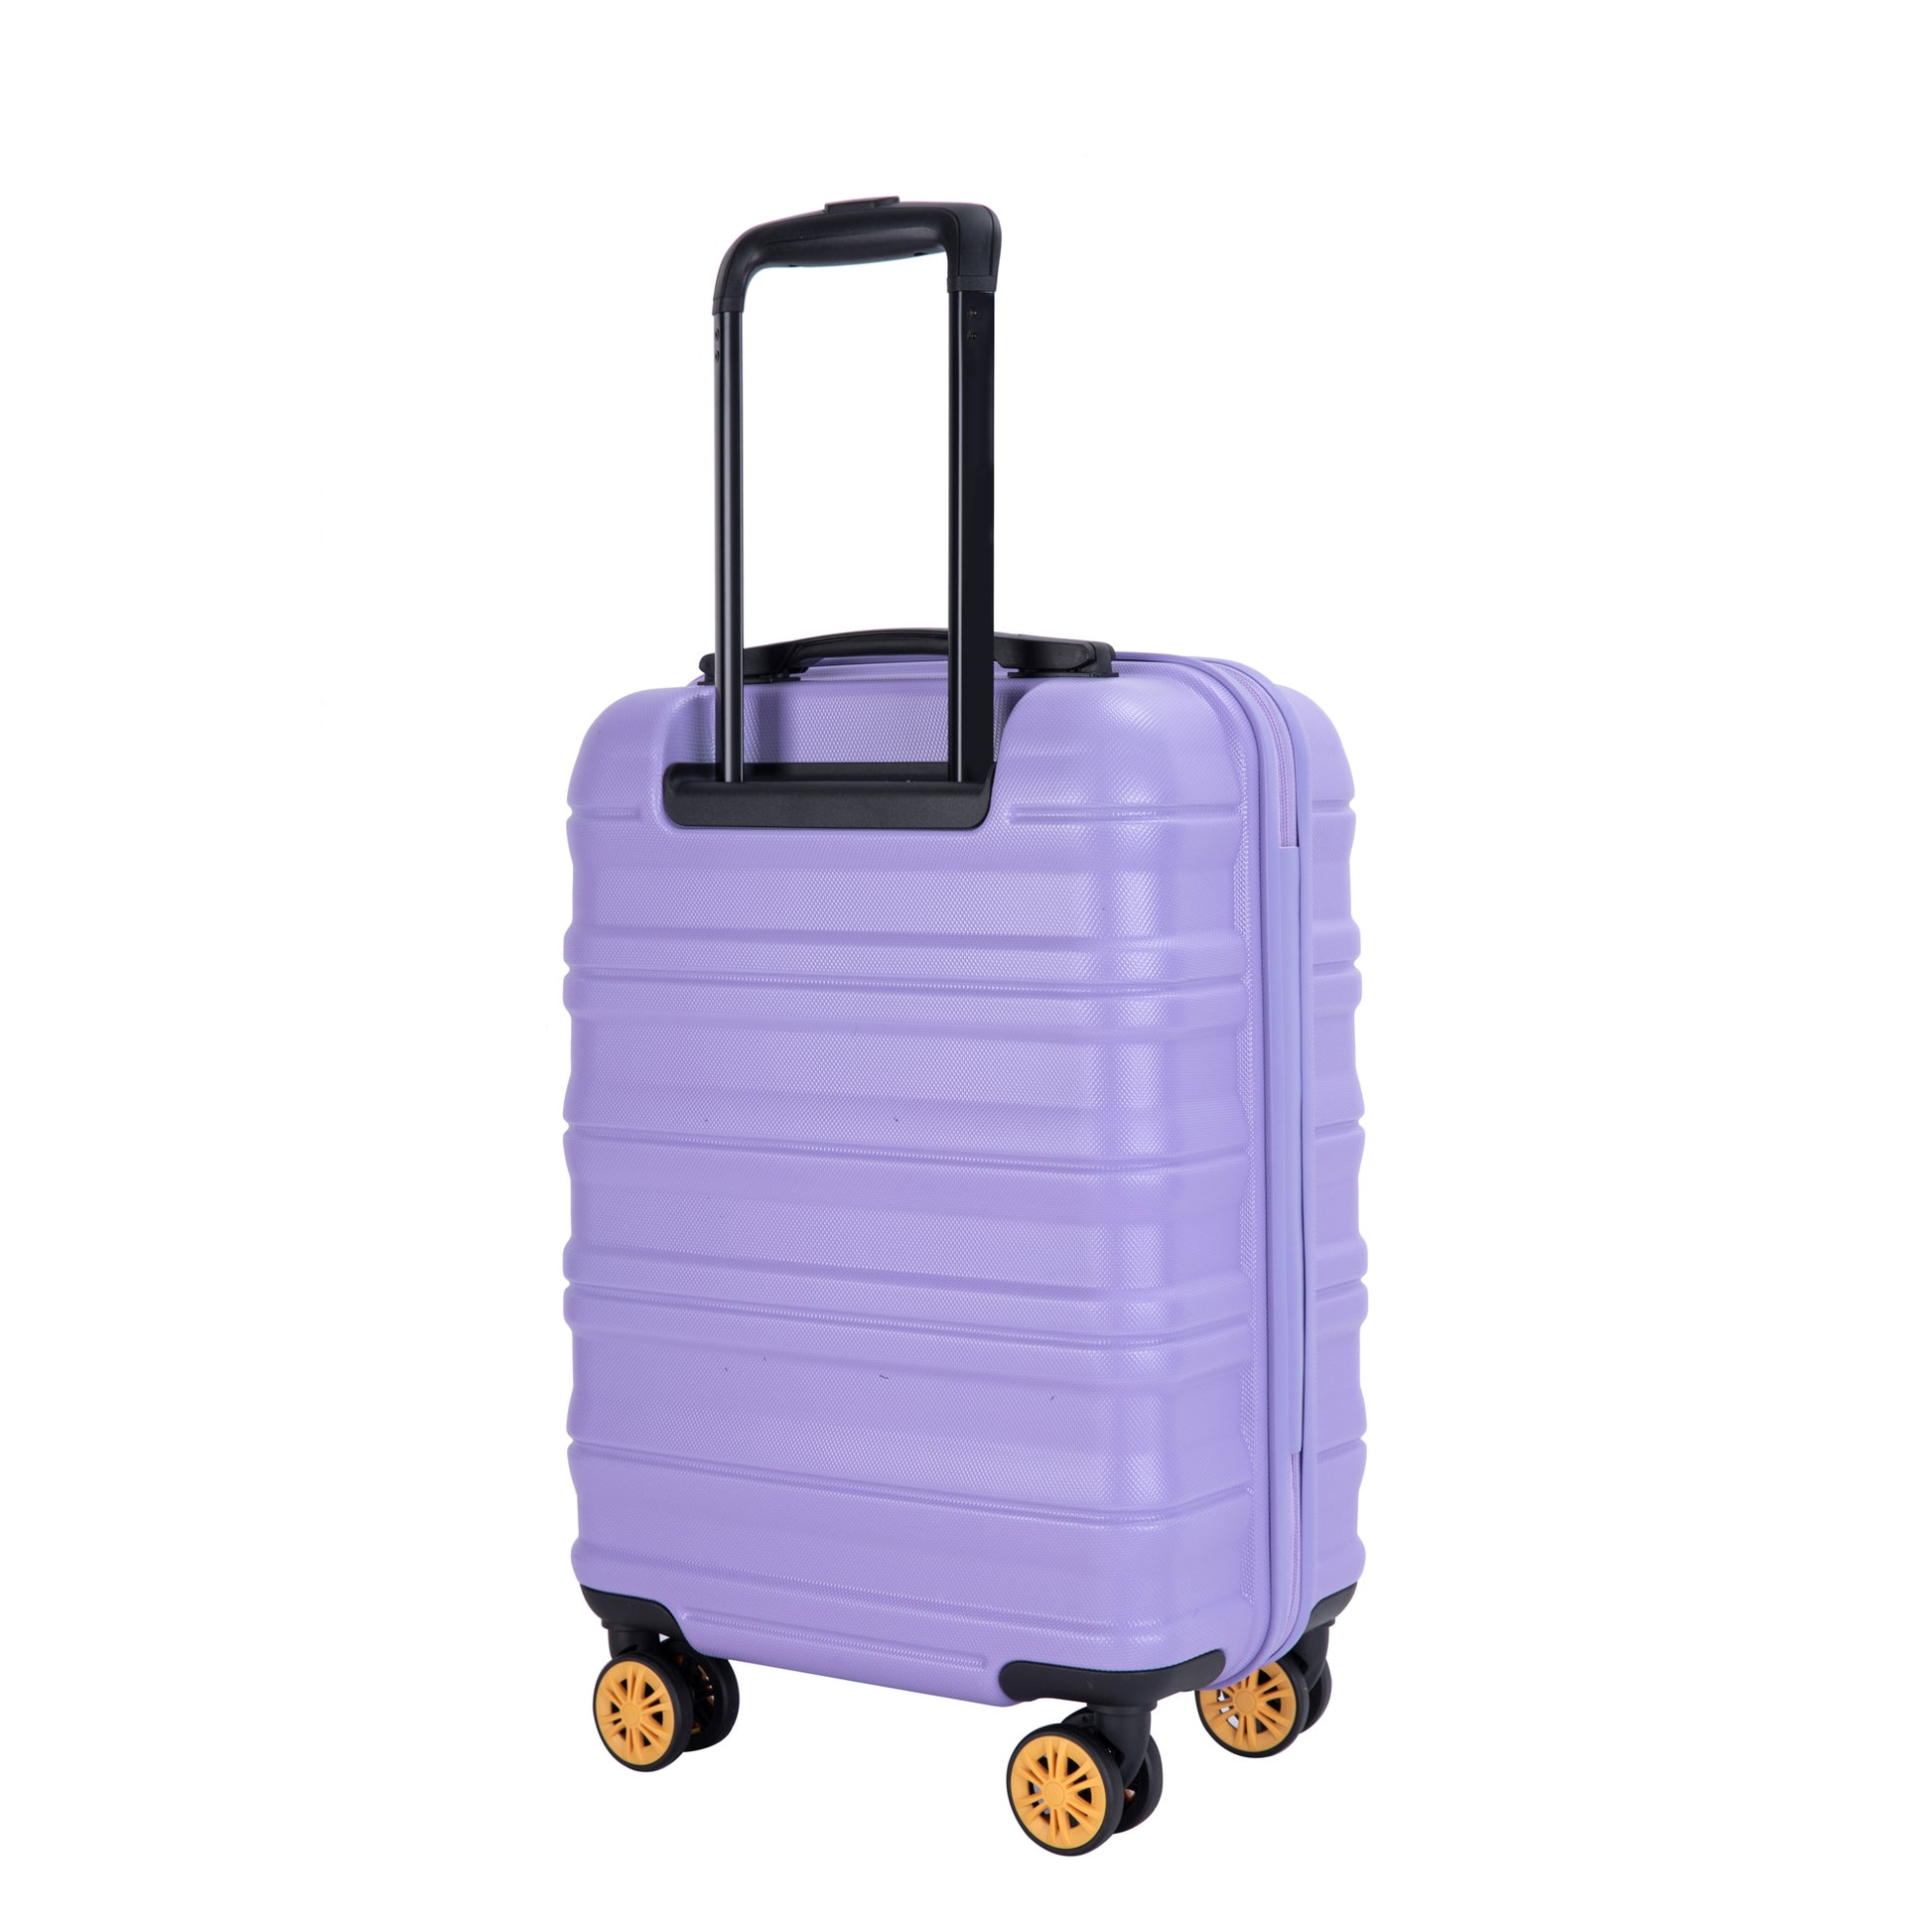 Carry On Luggage Airline Approved18.5" Carry On light purple-abs+pc